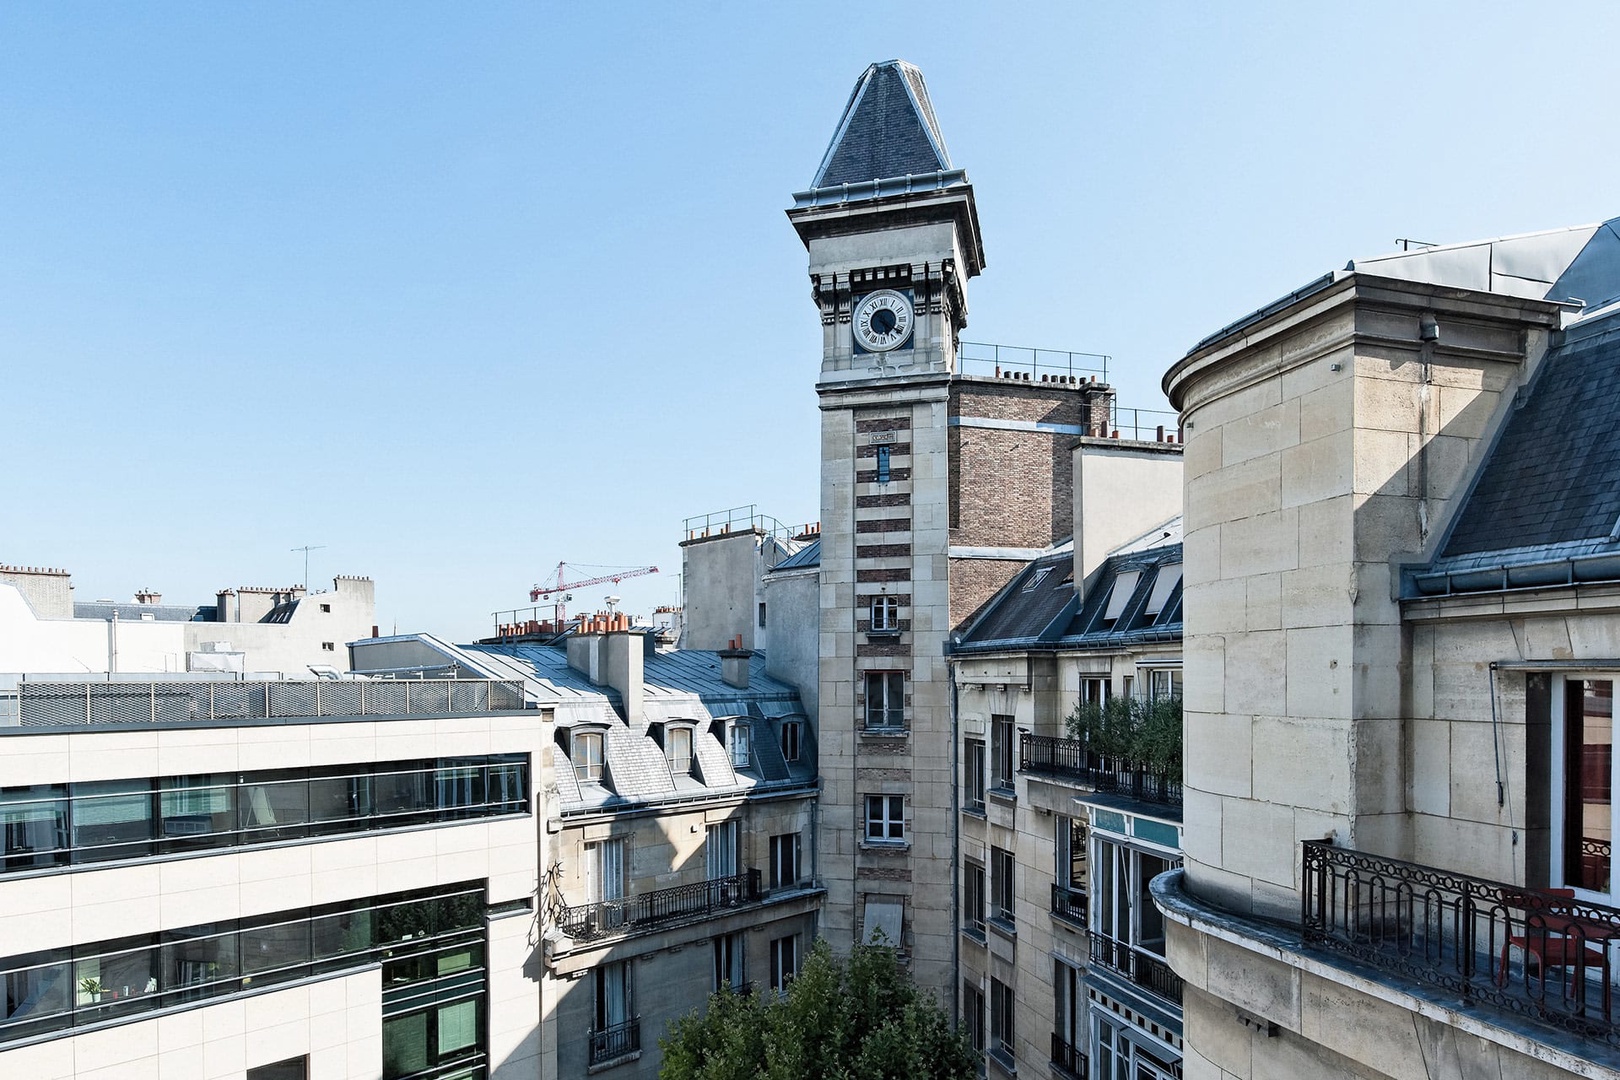 Charming Parisian architecture out your window.